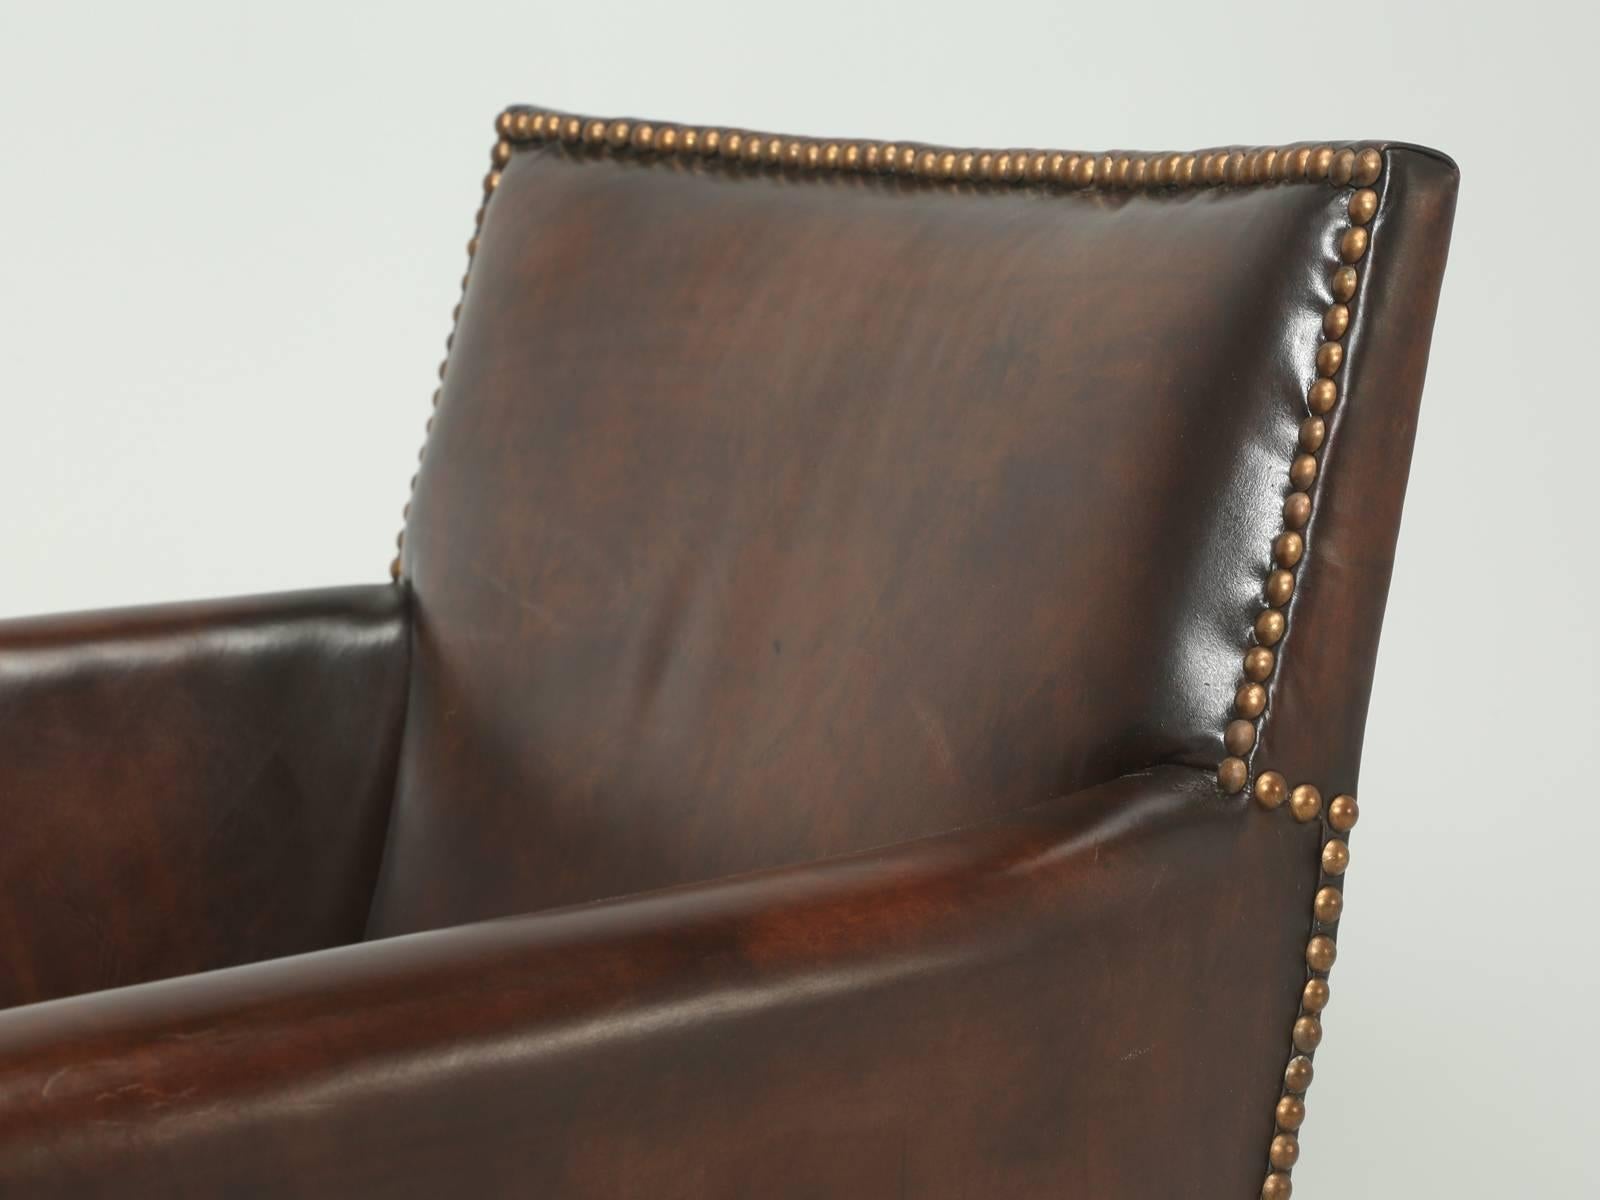 French leather club chairs that our, in house Old Plank upholstery department have completely disassembled and rebuilt from the wooden frame on up. Much of the leather on the club chairs is original and what is not, we hand dyed to match the